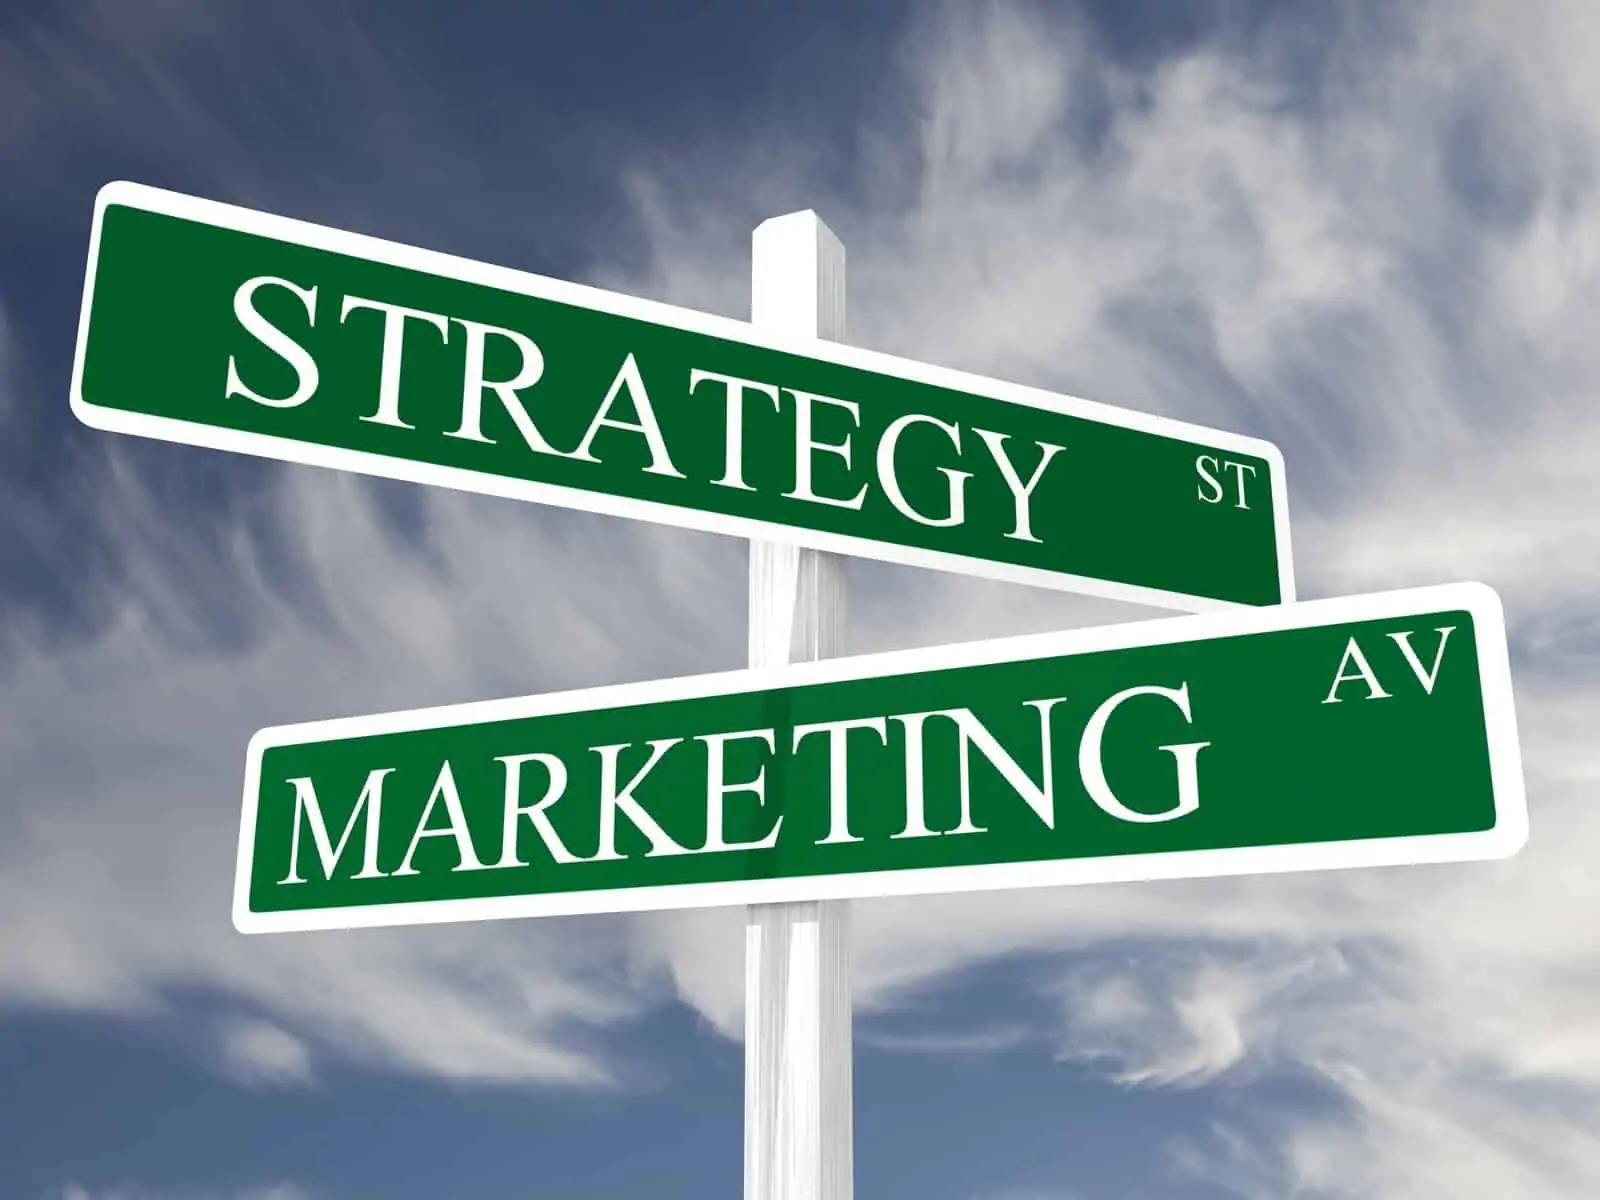 Marijuana Marketing Strategies for Retailers. Streets signs saying strategy and marketing.